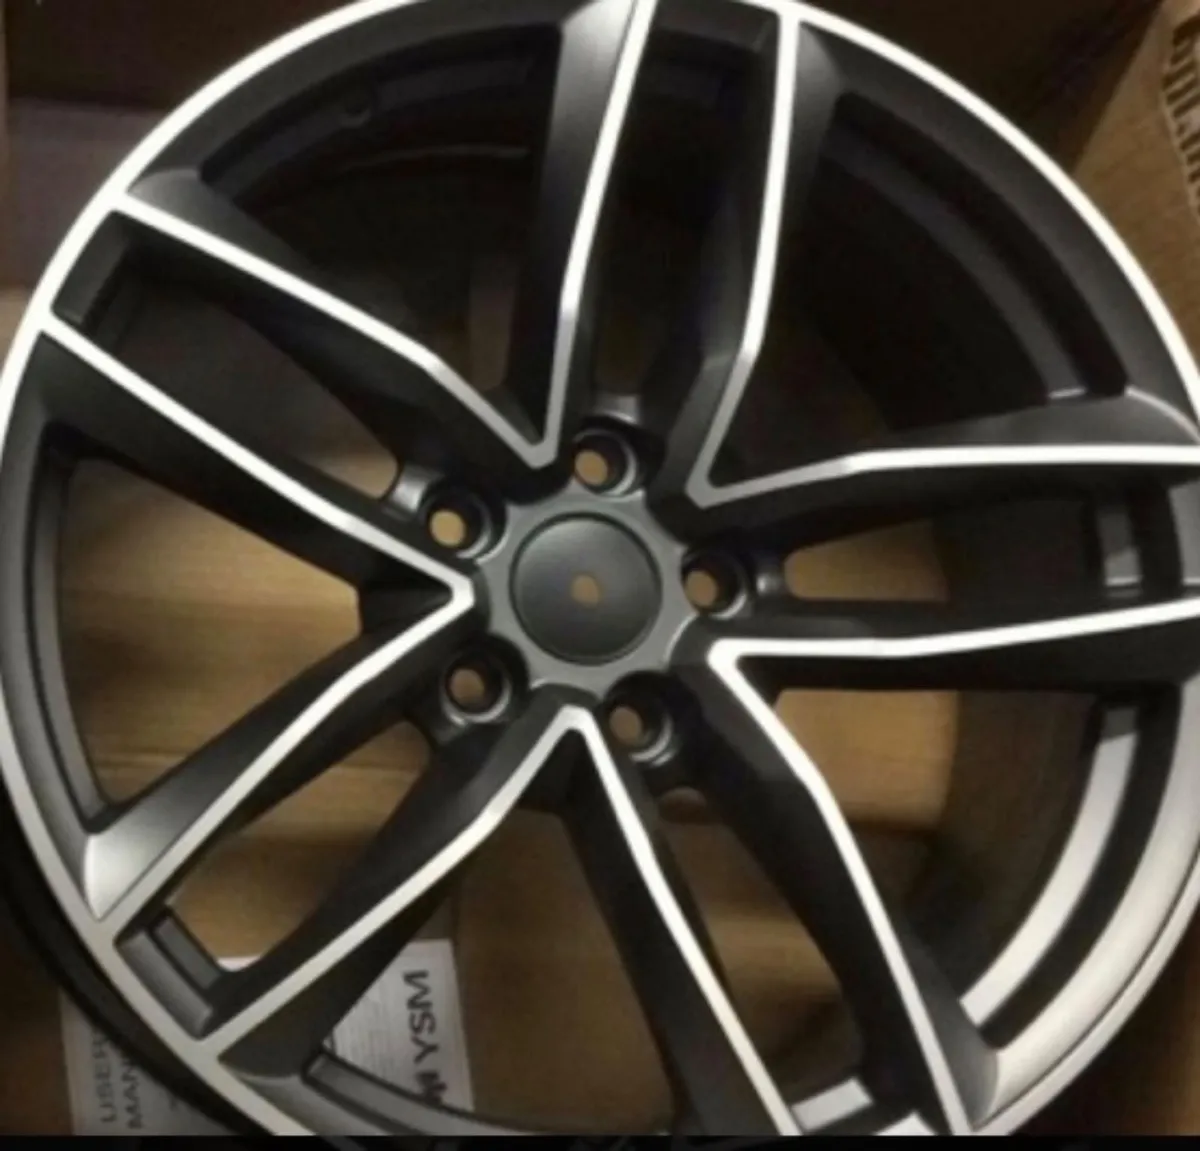 18” rs6 c alloys & tyres new - Image 1